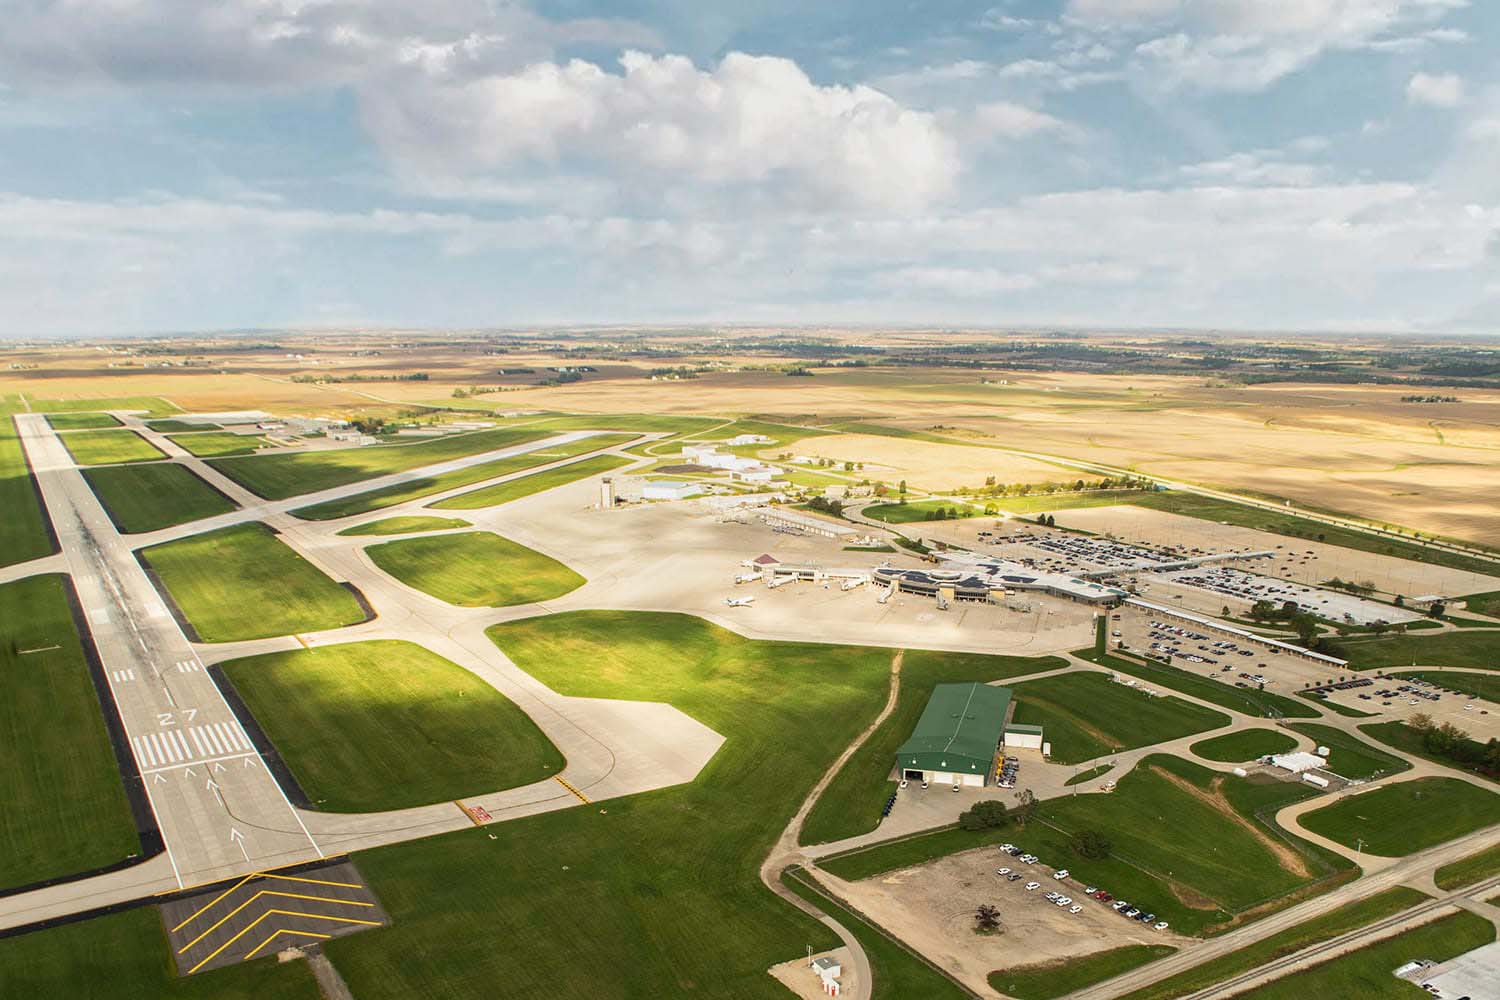 where is the airport located for sioux city, iowa?